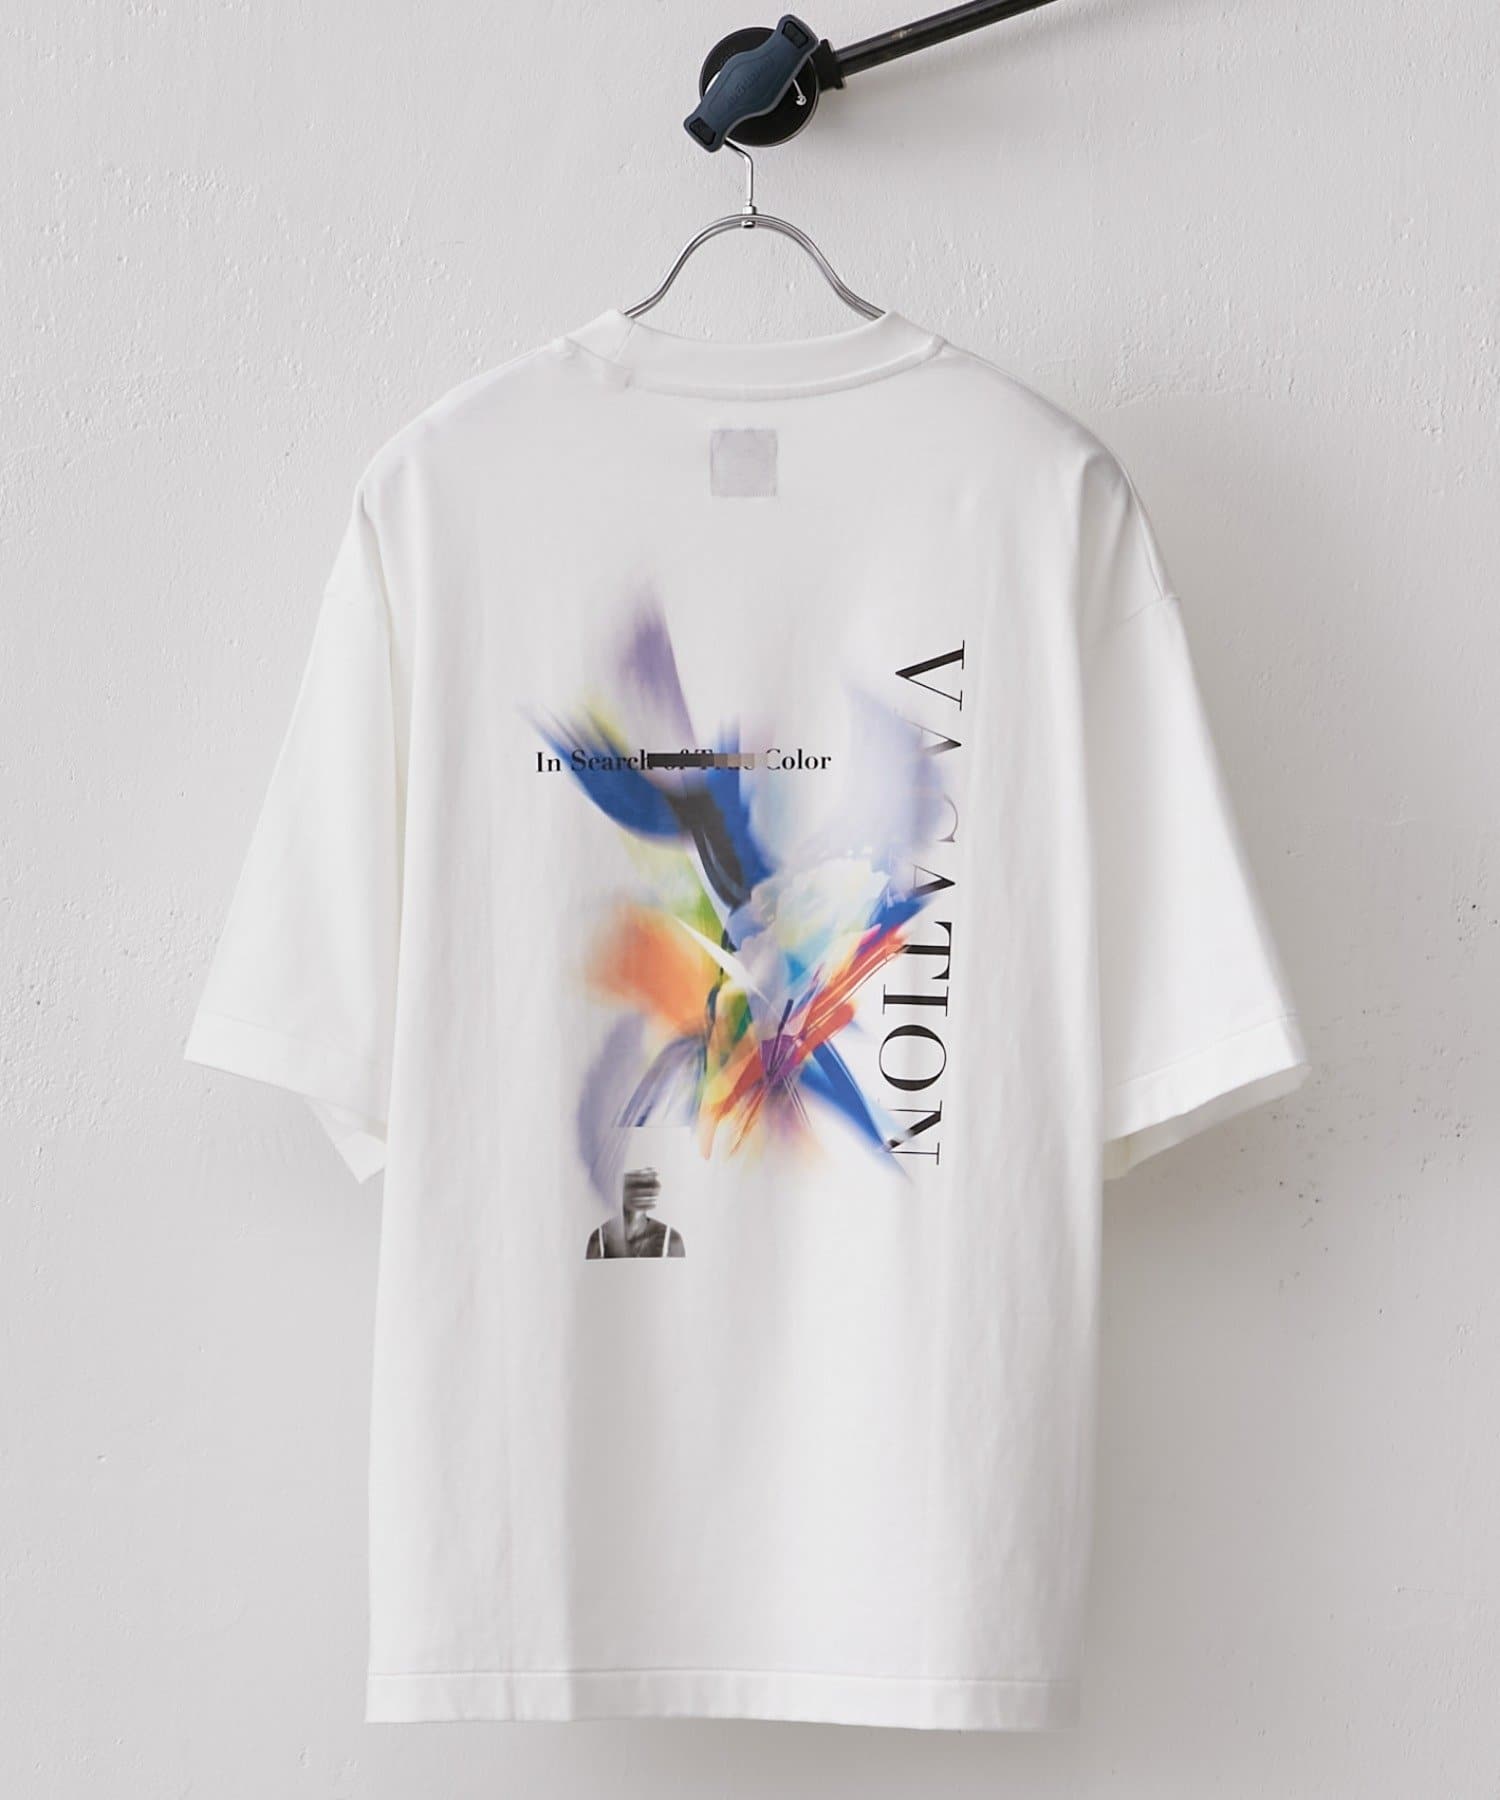 Lui's(ルイス) “Color Palette” プリントTシャツ